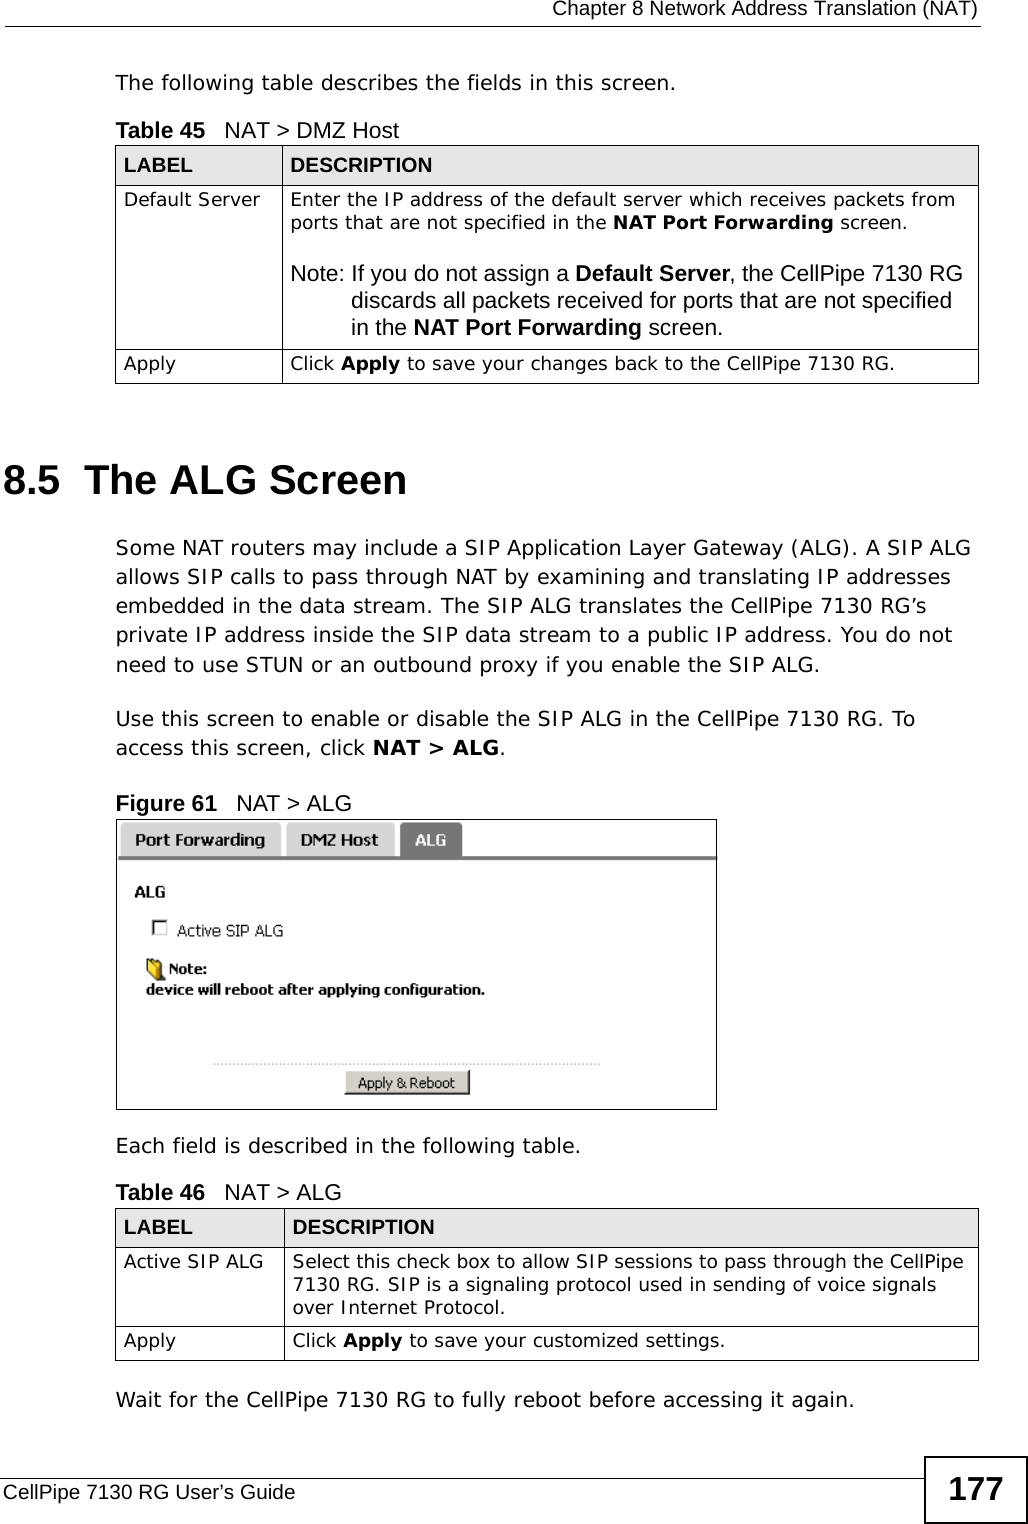  Chapter 8 Network Address Translation (NAT)CellPipe 7130 RG User’s Guide 177The following table describes the fields in this screen. 8.5  The ALG Screen Some NAT routers may include a SIP Application Layer Gateway (ALG). A SIP ALG allows SIP calls to pass through NAT by examining and translating IP addresses embedded in the data stream. The SIP ALG translates the CellPipe 7130 RG’s private IP address inside the SIP data stream to a public IP address. You do not need to use STUN or an outbound proxy if you enable the SIP ALG.Use this screen to enable or disable the SIP ALG in the CellPipe 7130 RG. To access this screen, click NAT &gt; ALG.Figure 61   NAT &gt; ALGEach field is described in the following table.Wait for the CellPipe 7130 RG to fully reboot before accessing it again.Table 45   NAT &gt; DMZ HostLABEL DESCRIPTIONDefault Server Enter the IP address of the default server which receives packets from ports that are not specified in the NAT Port Forwarding screen. Note: If you do not assign a Default Server, the CellPipe 7130 RG discards all packets received for ports that are not specified in the NAT Port Forwarding screen.Apply Click Apply to save your changes back to the CellPipe 7130 RG.Table 46   NAT &gt; ALGLABEL DESCRIPTIONActive SIP ALG Select this check box to allow SIP sessions to pass through the CellPipe 7130 RG. SIP is a signaling protocol used in sending of voice signals over Internet Protocol.Apply Click Apply to save your customized settings.